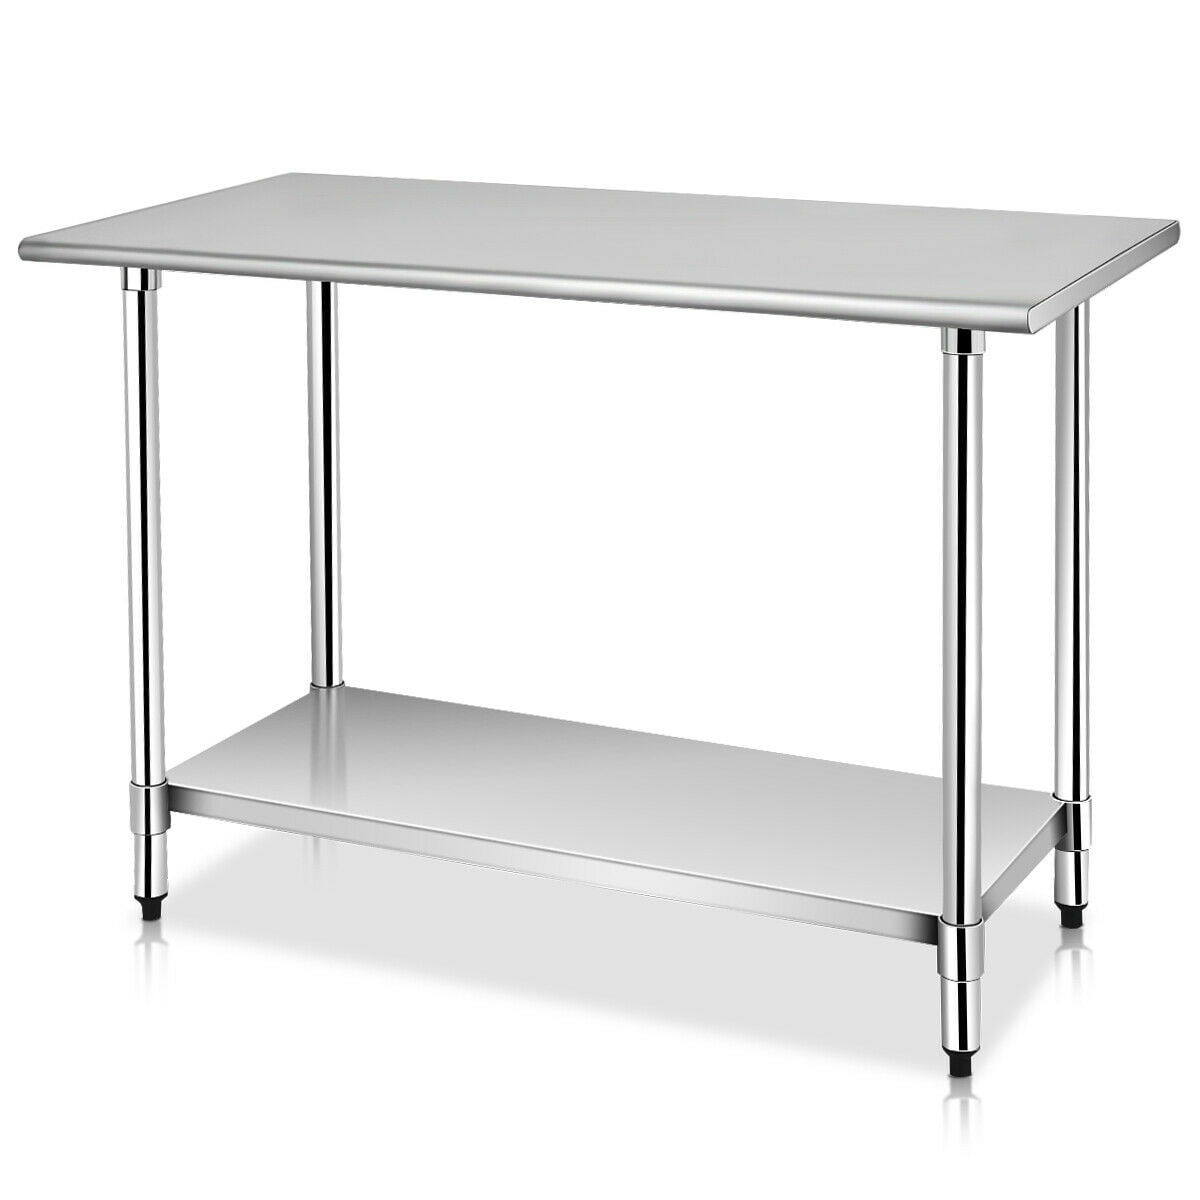 NSF Certified Fenix Sol Commercial Kitchen Stainless Steel Double Overshelf for Work Tables 18 W x 72L x 31H 